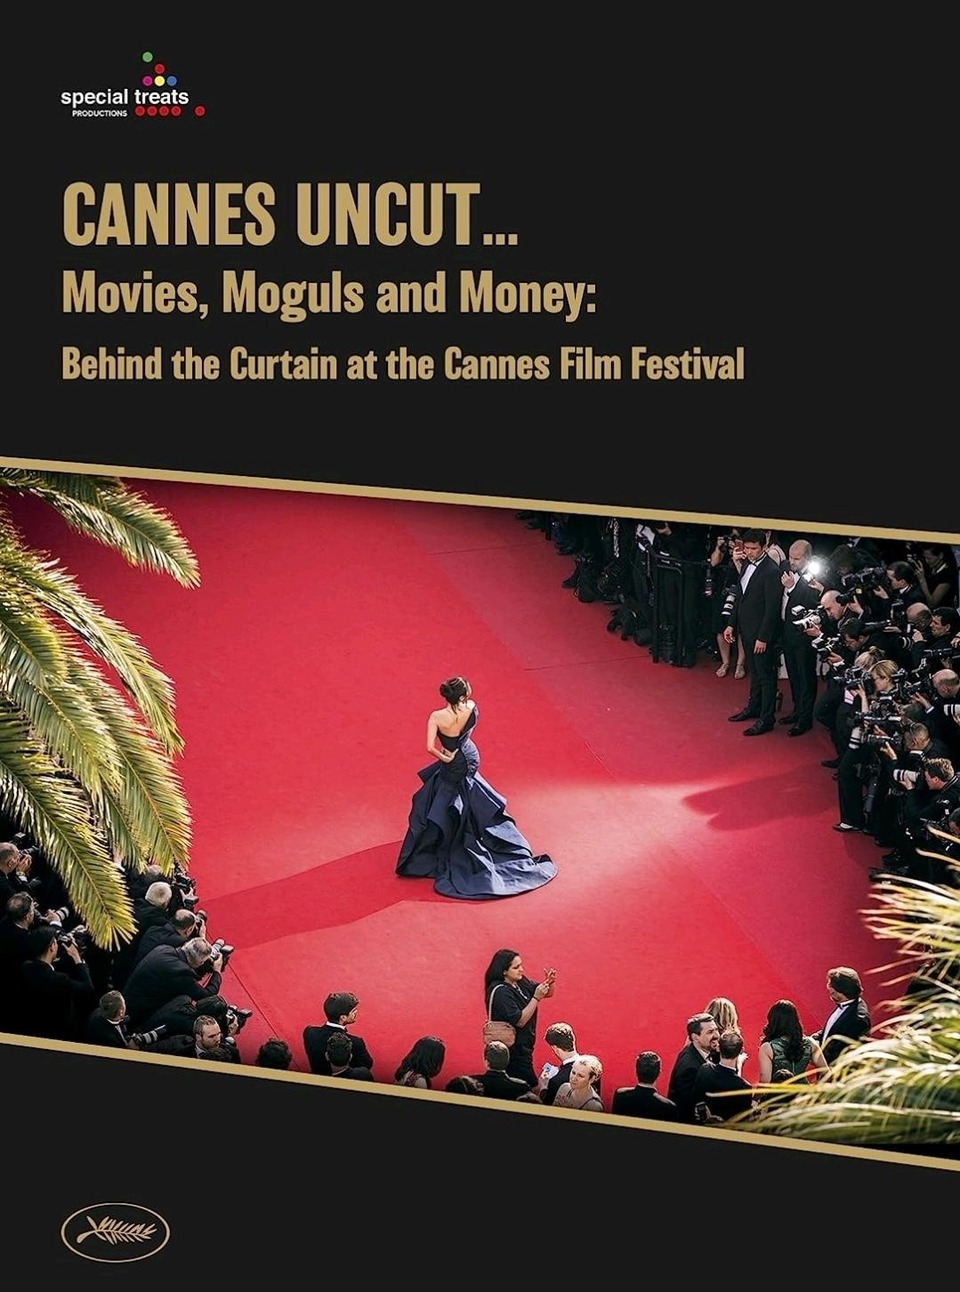 Documentary Cannes Uncut